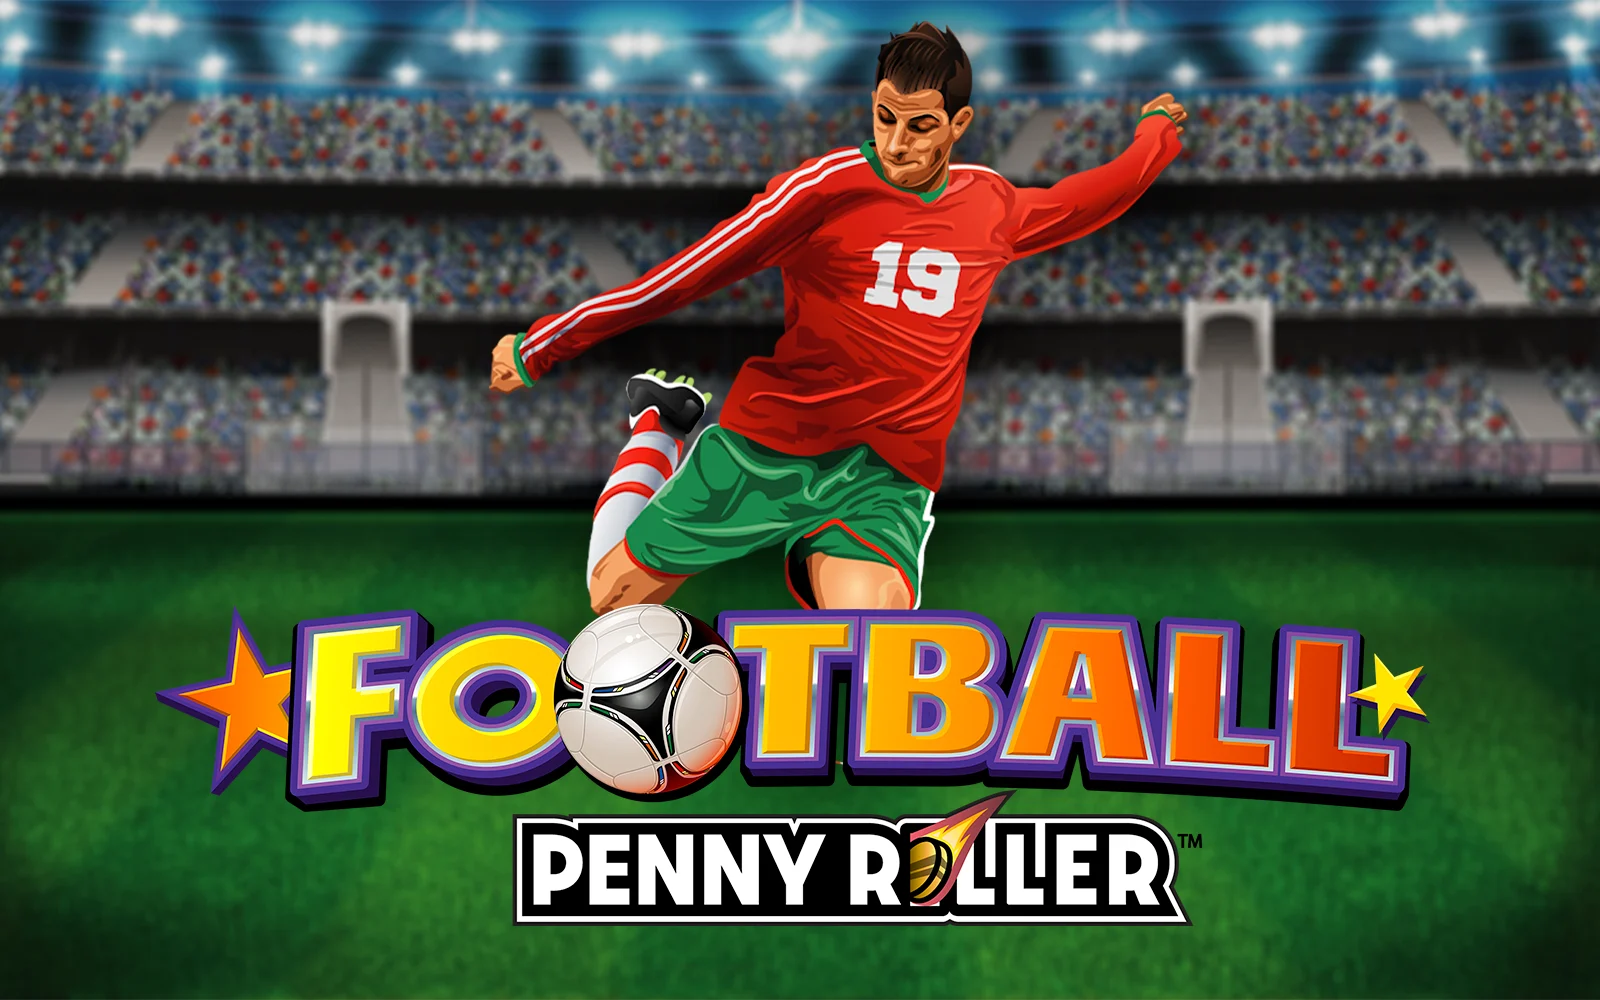 Play Football Penny Roller™ on Starcasino.be online casino